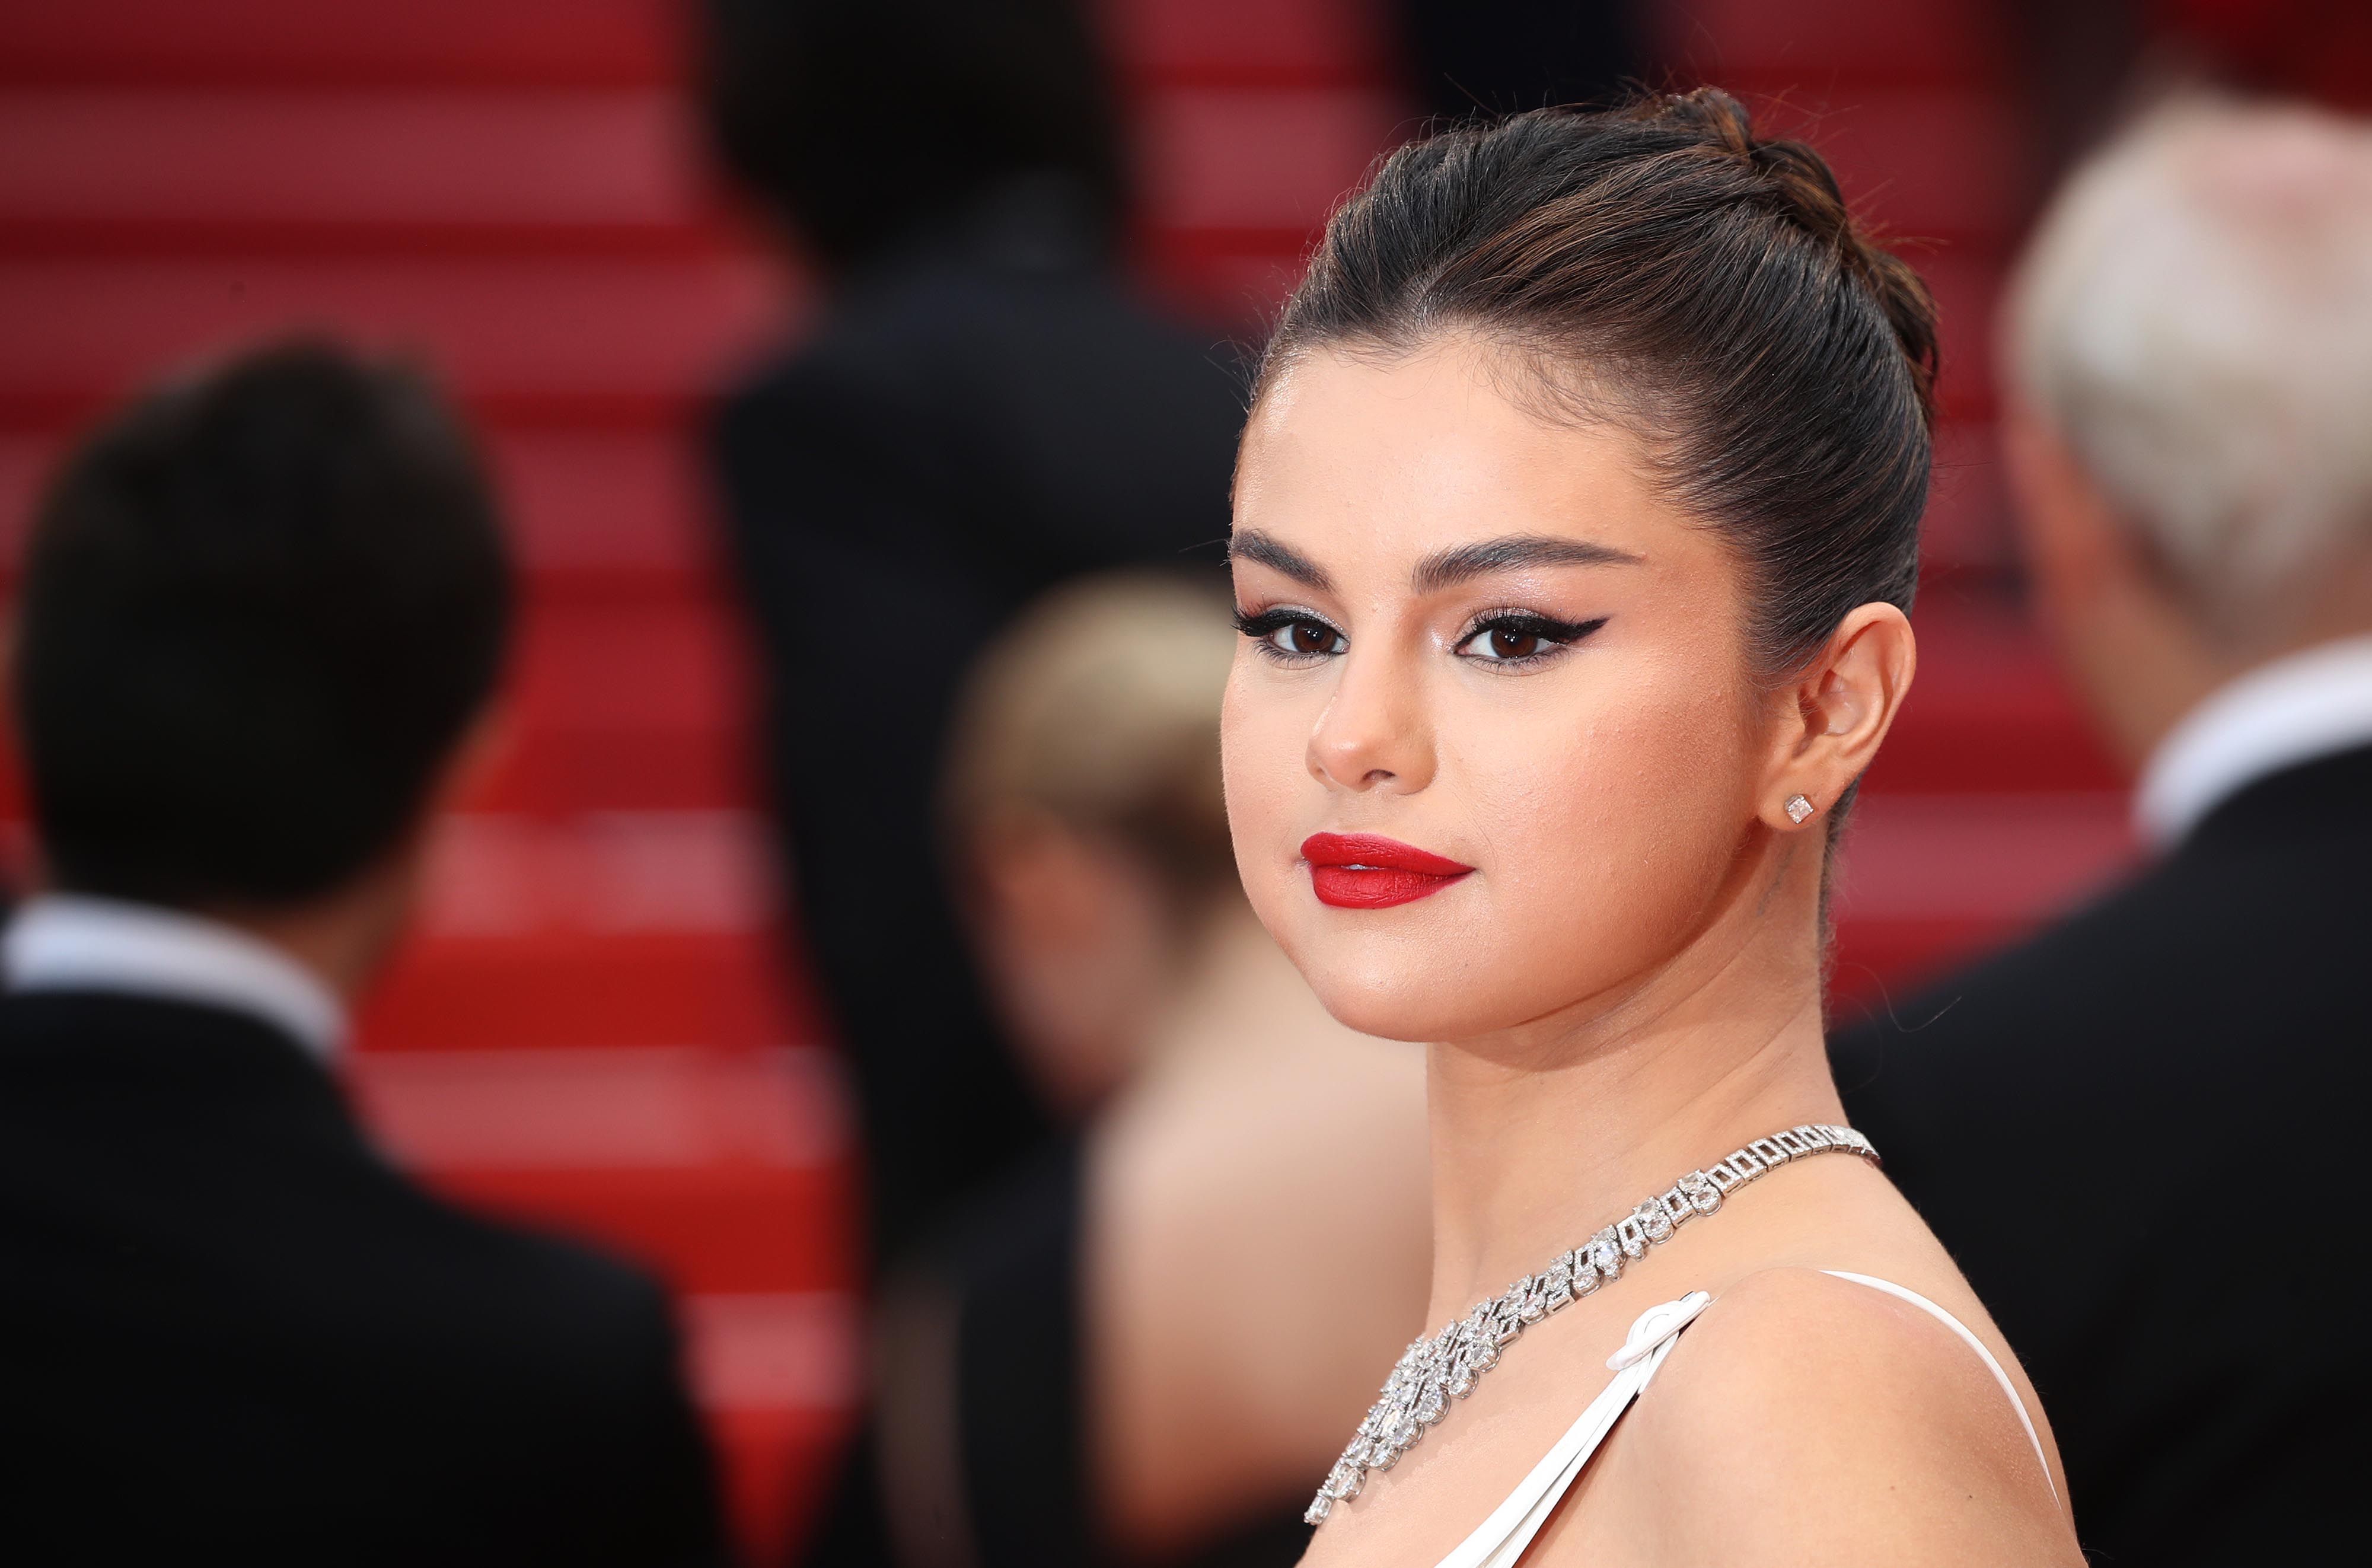 Selena Gomez is 'happy' to be the new face of Louis Vuitton